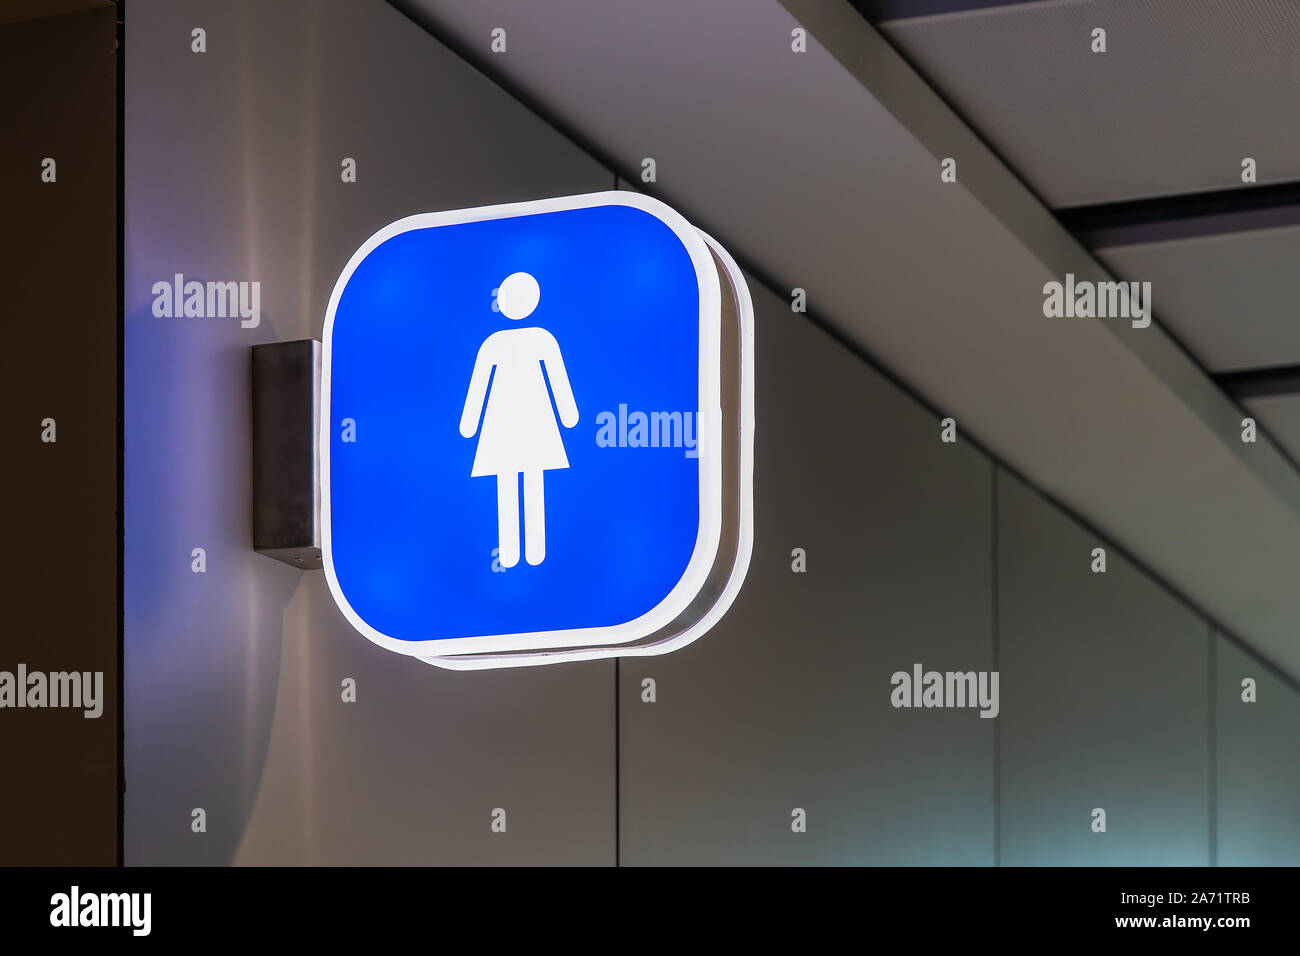 ISTANBUL, Turkey august 2019: international airport restroom sign for woman hanging on the wall, pictogram in blue and white, background in colour Stock Photo